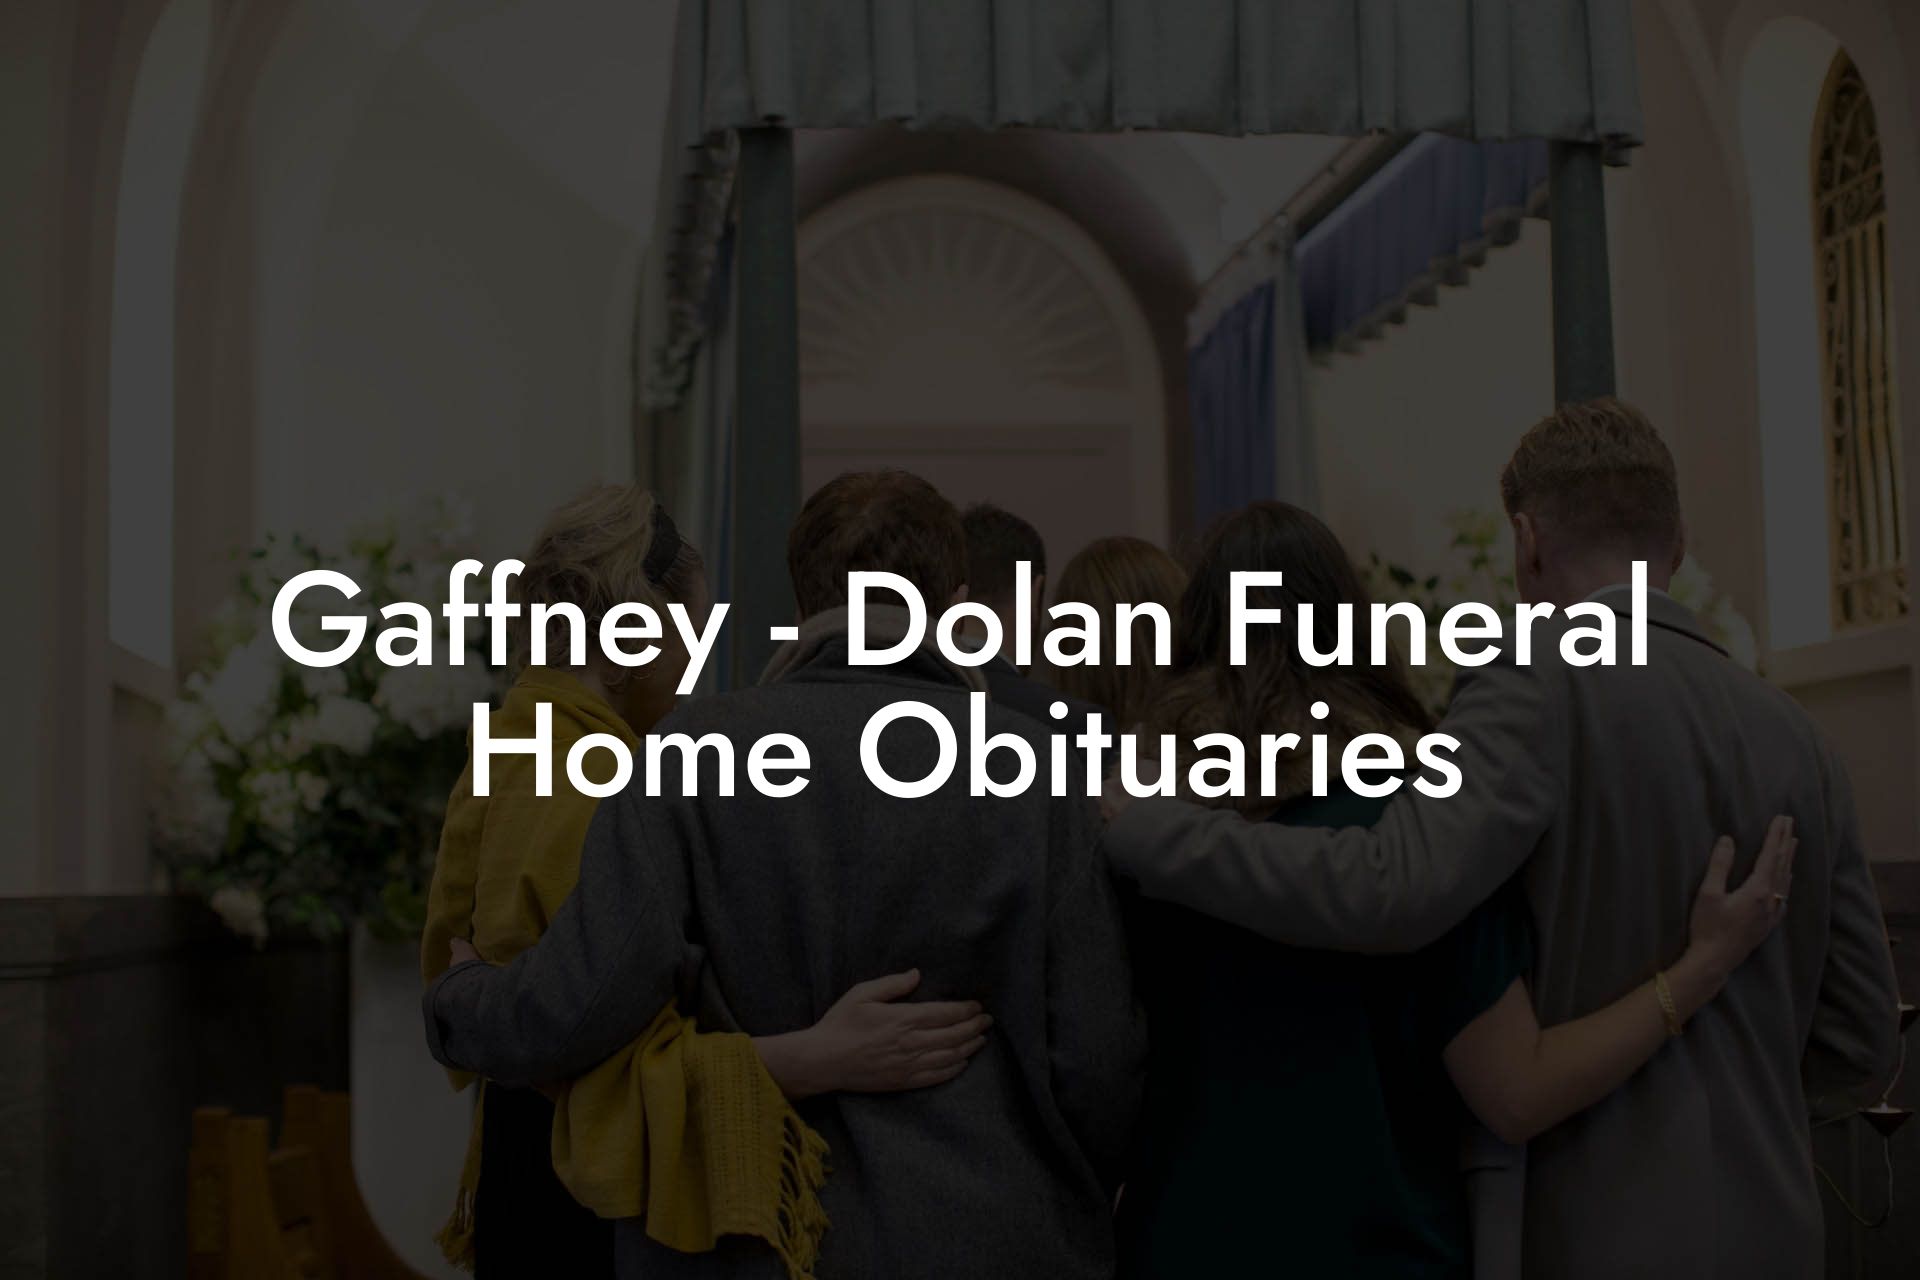 Gaffney - Dolan Funeral Home Obituaries